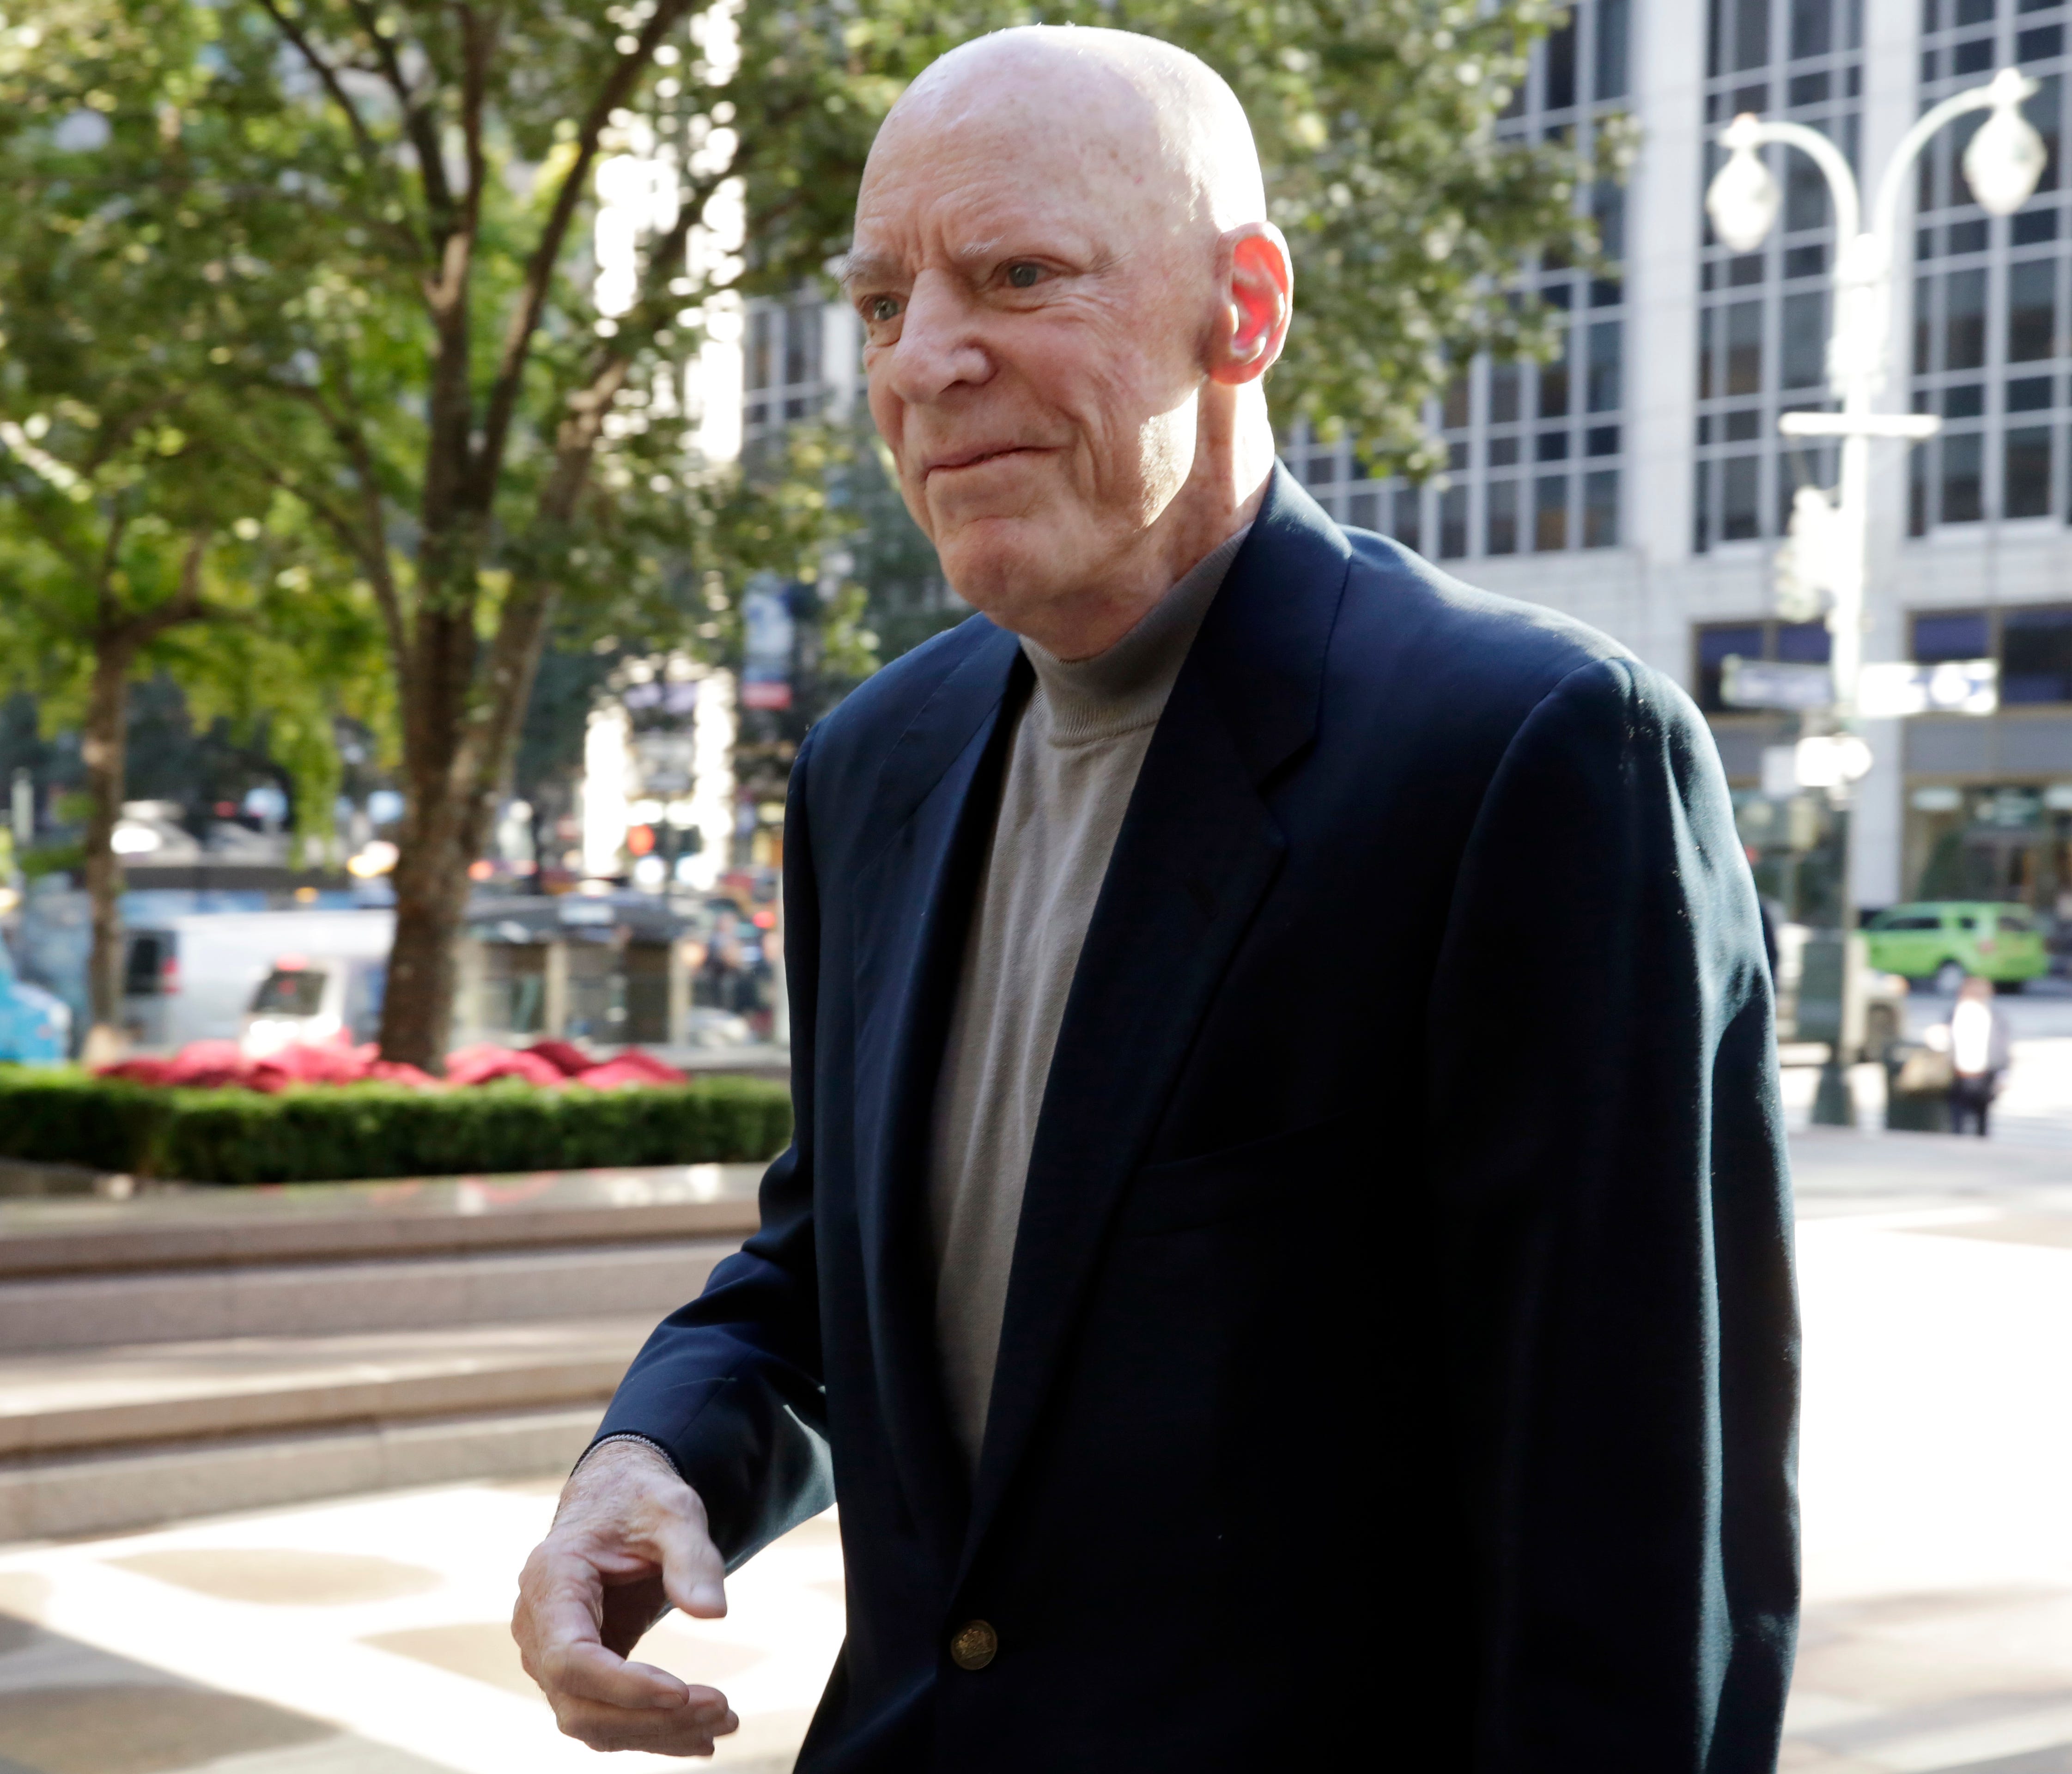 Houston Texans NFL football team owner Robert McNair arrives for meetings at the league headquarters in New York, Tuesday, Oct. 17, 2017. (AP Photo/Richard Drew)